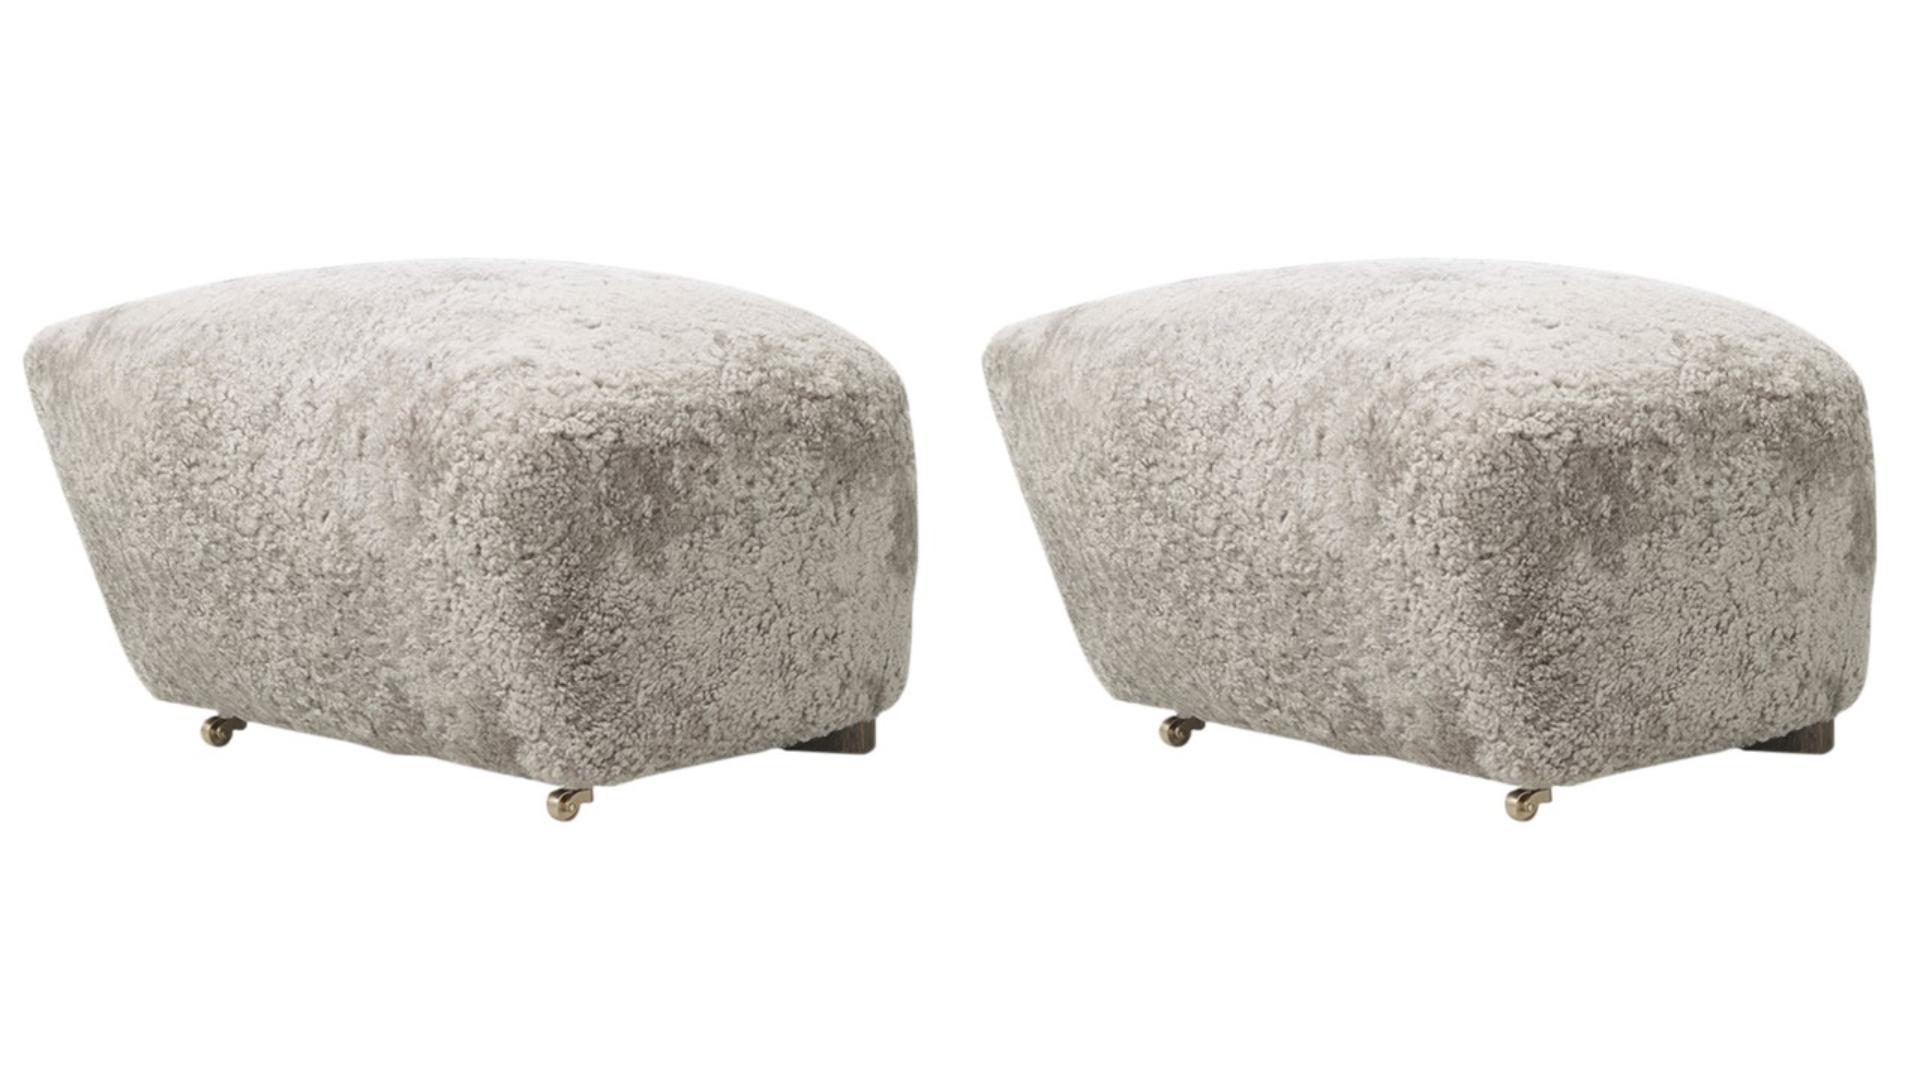 Set of 2 green tea smoked oak sheepskin the tired man footstools by Lassen
Dimensions: W 55 x D 53 x H 36 cm. 
Materials: Sheepskin.

Flemming Lassen designed the overstuffed easy chair, The Tired Man, for The Copenhagen Cabinetmakers’ Guild